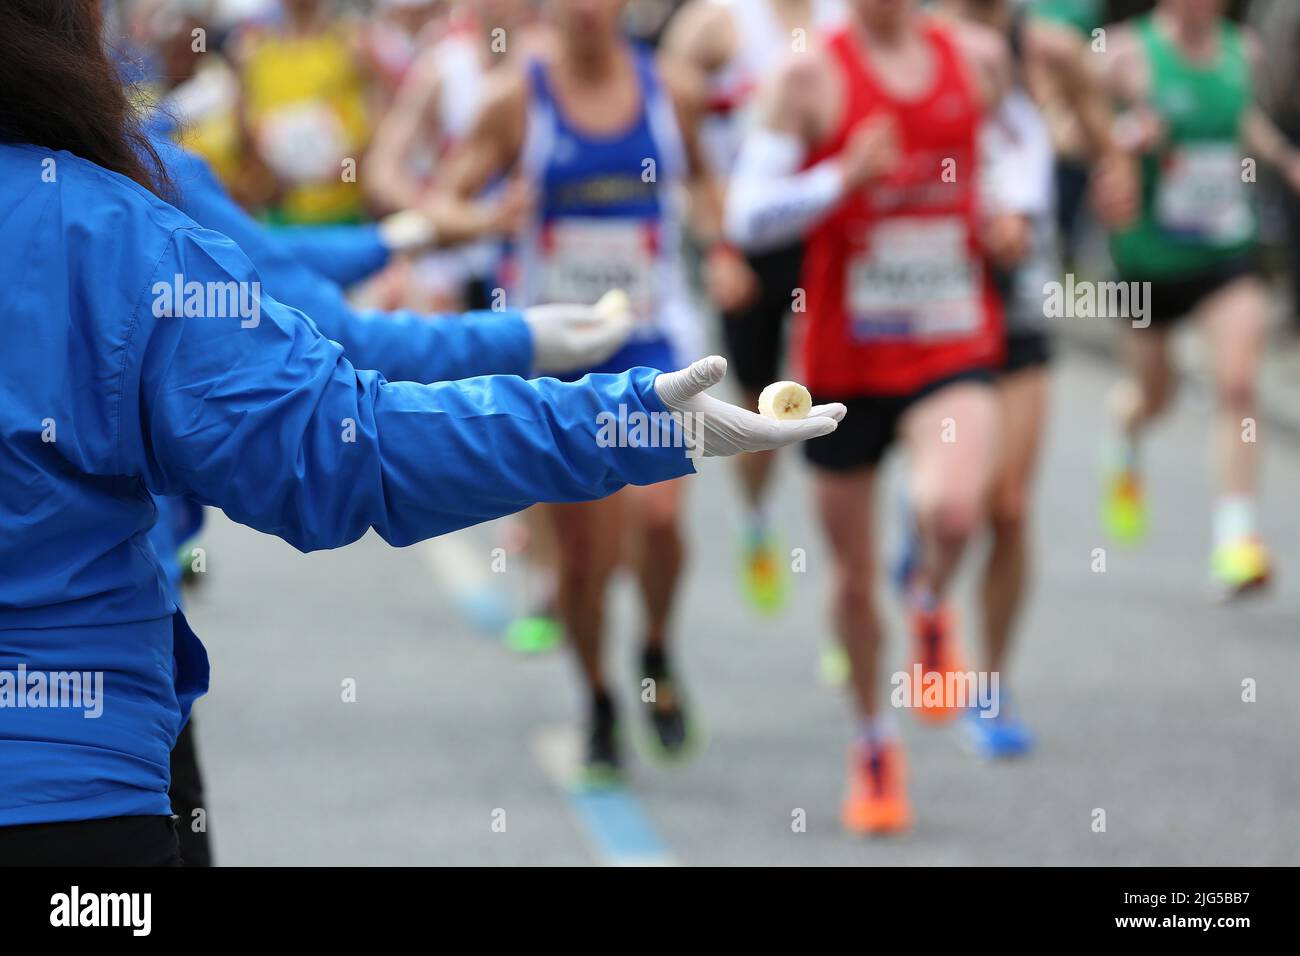 employees give the marathon runners pieces of banana as food Stock Photo